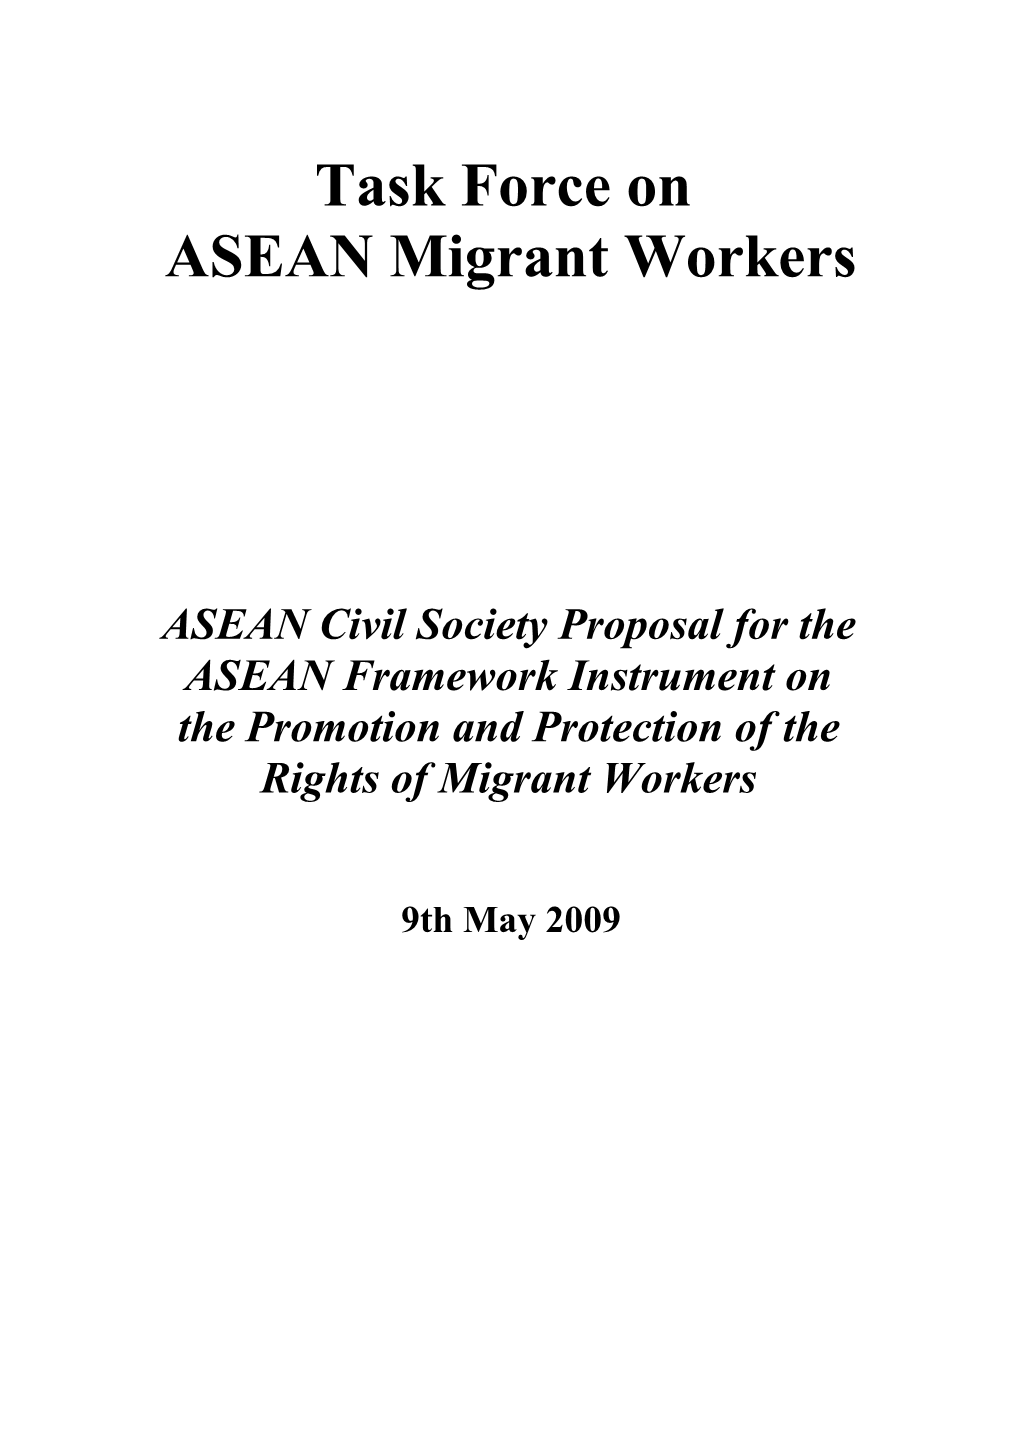 Principles of Human Rights and Migrant Workers Rights Connection to International Labour